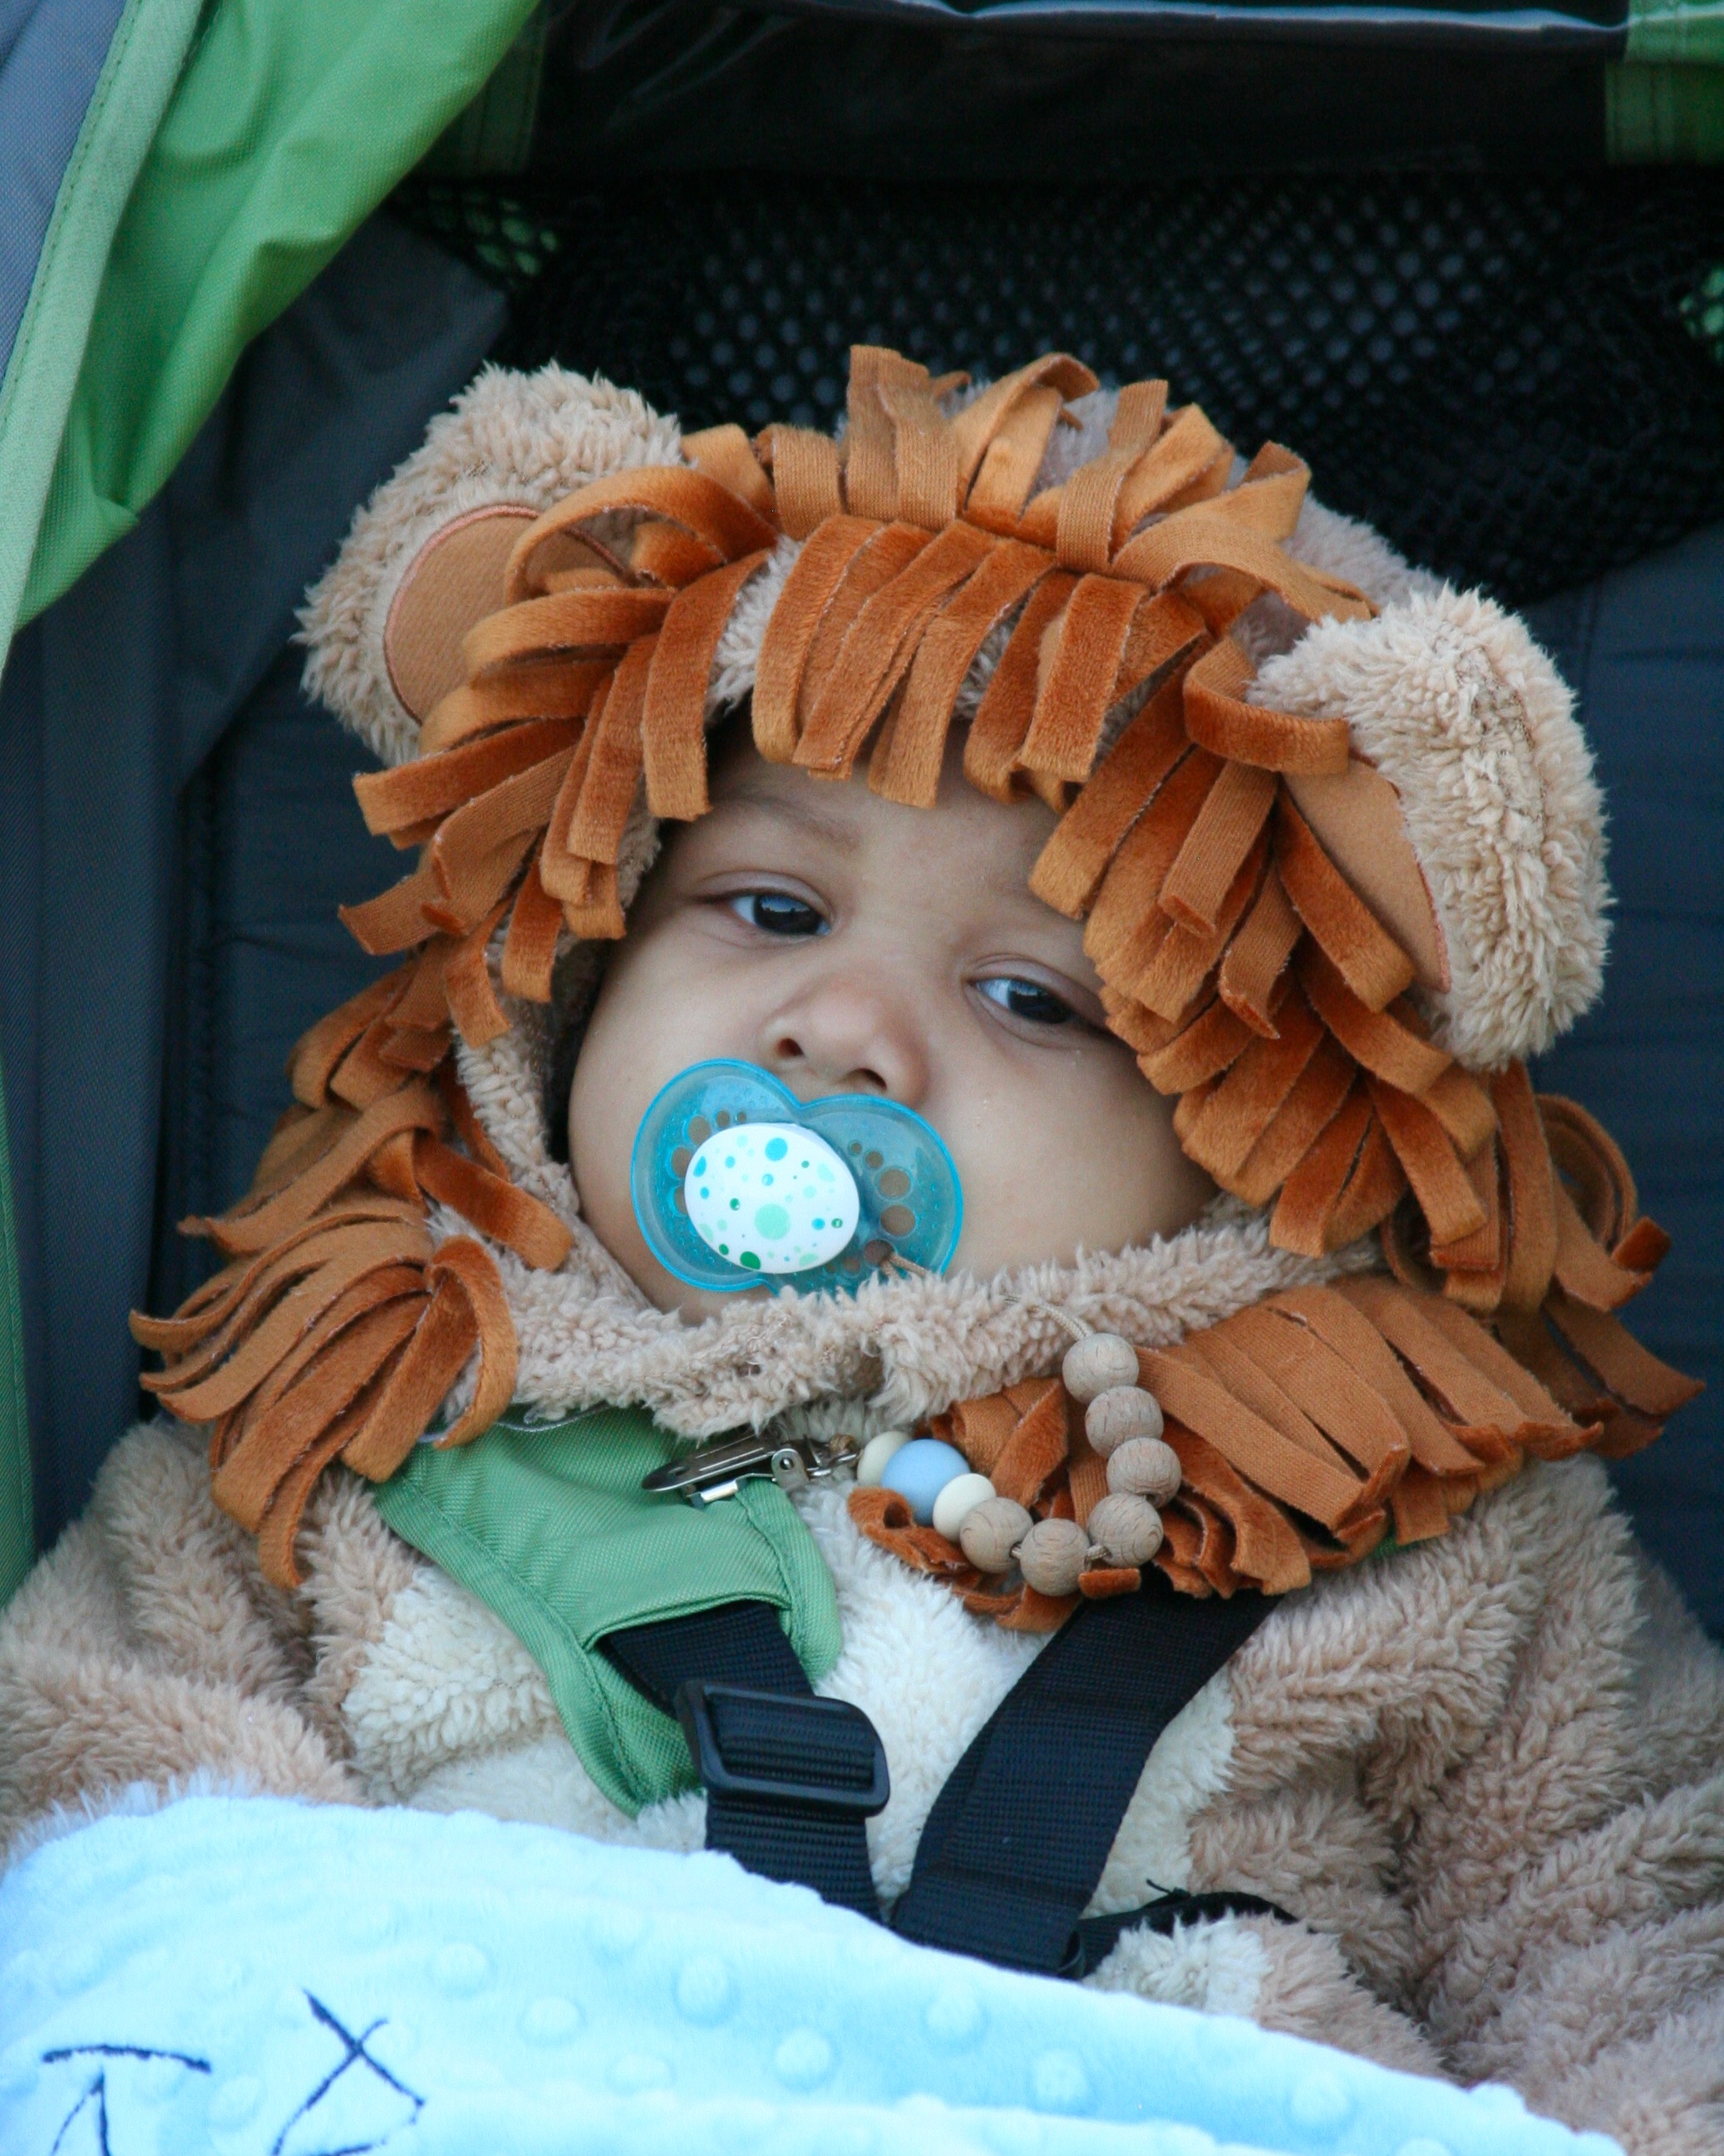 Infant with pacifier dressed as a lion